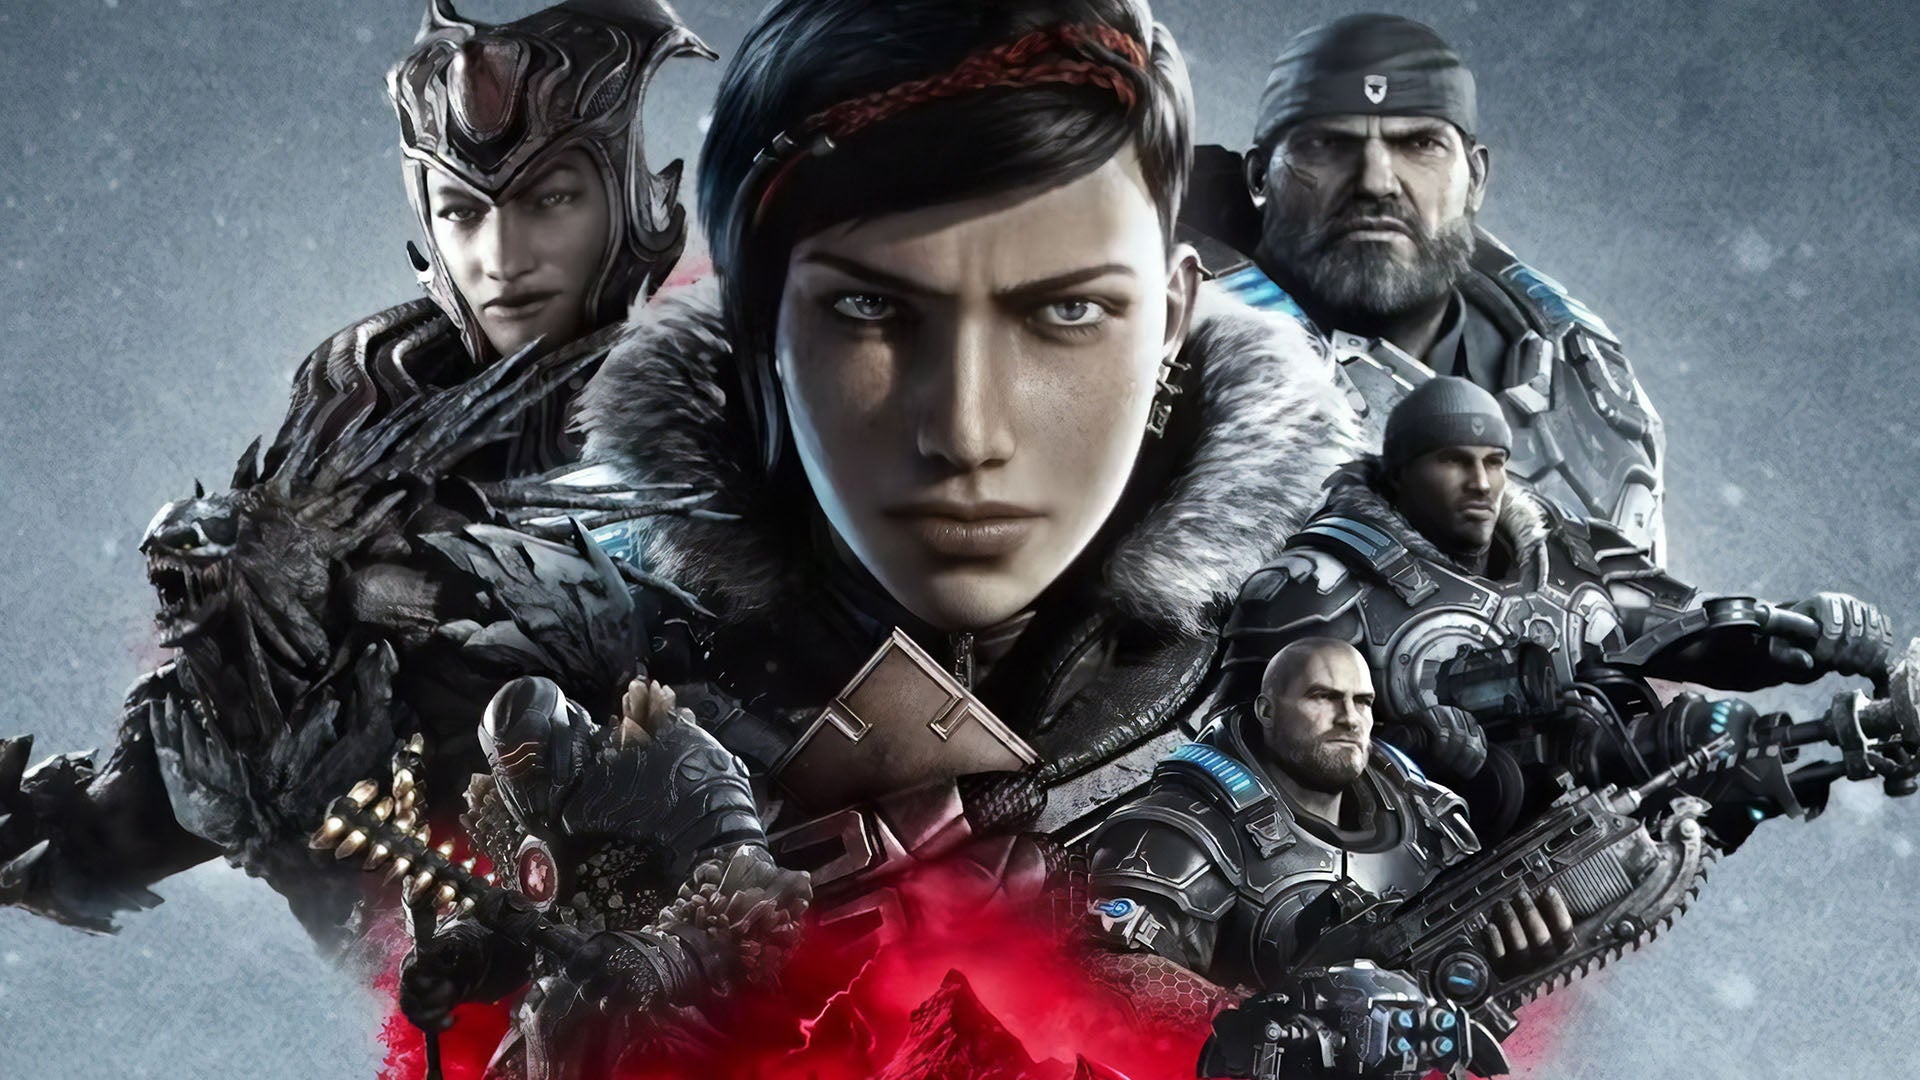 Image for Gears 5 Tech Test - PC/Xbox One X 4K Analysis